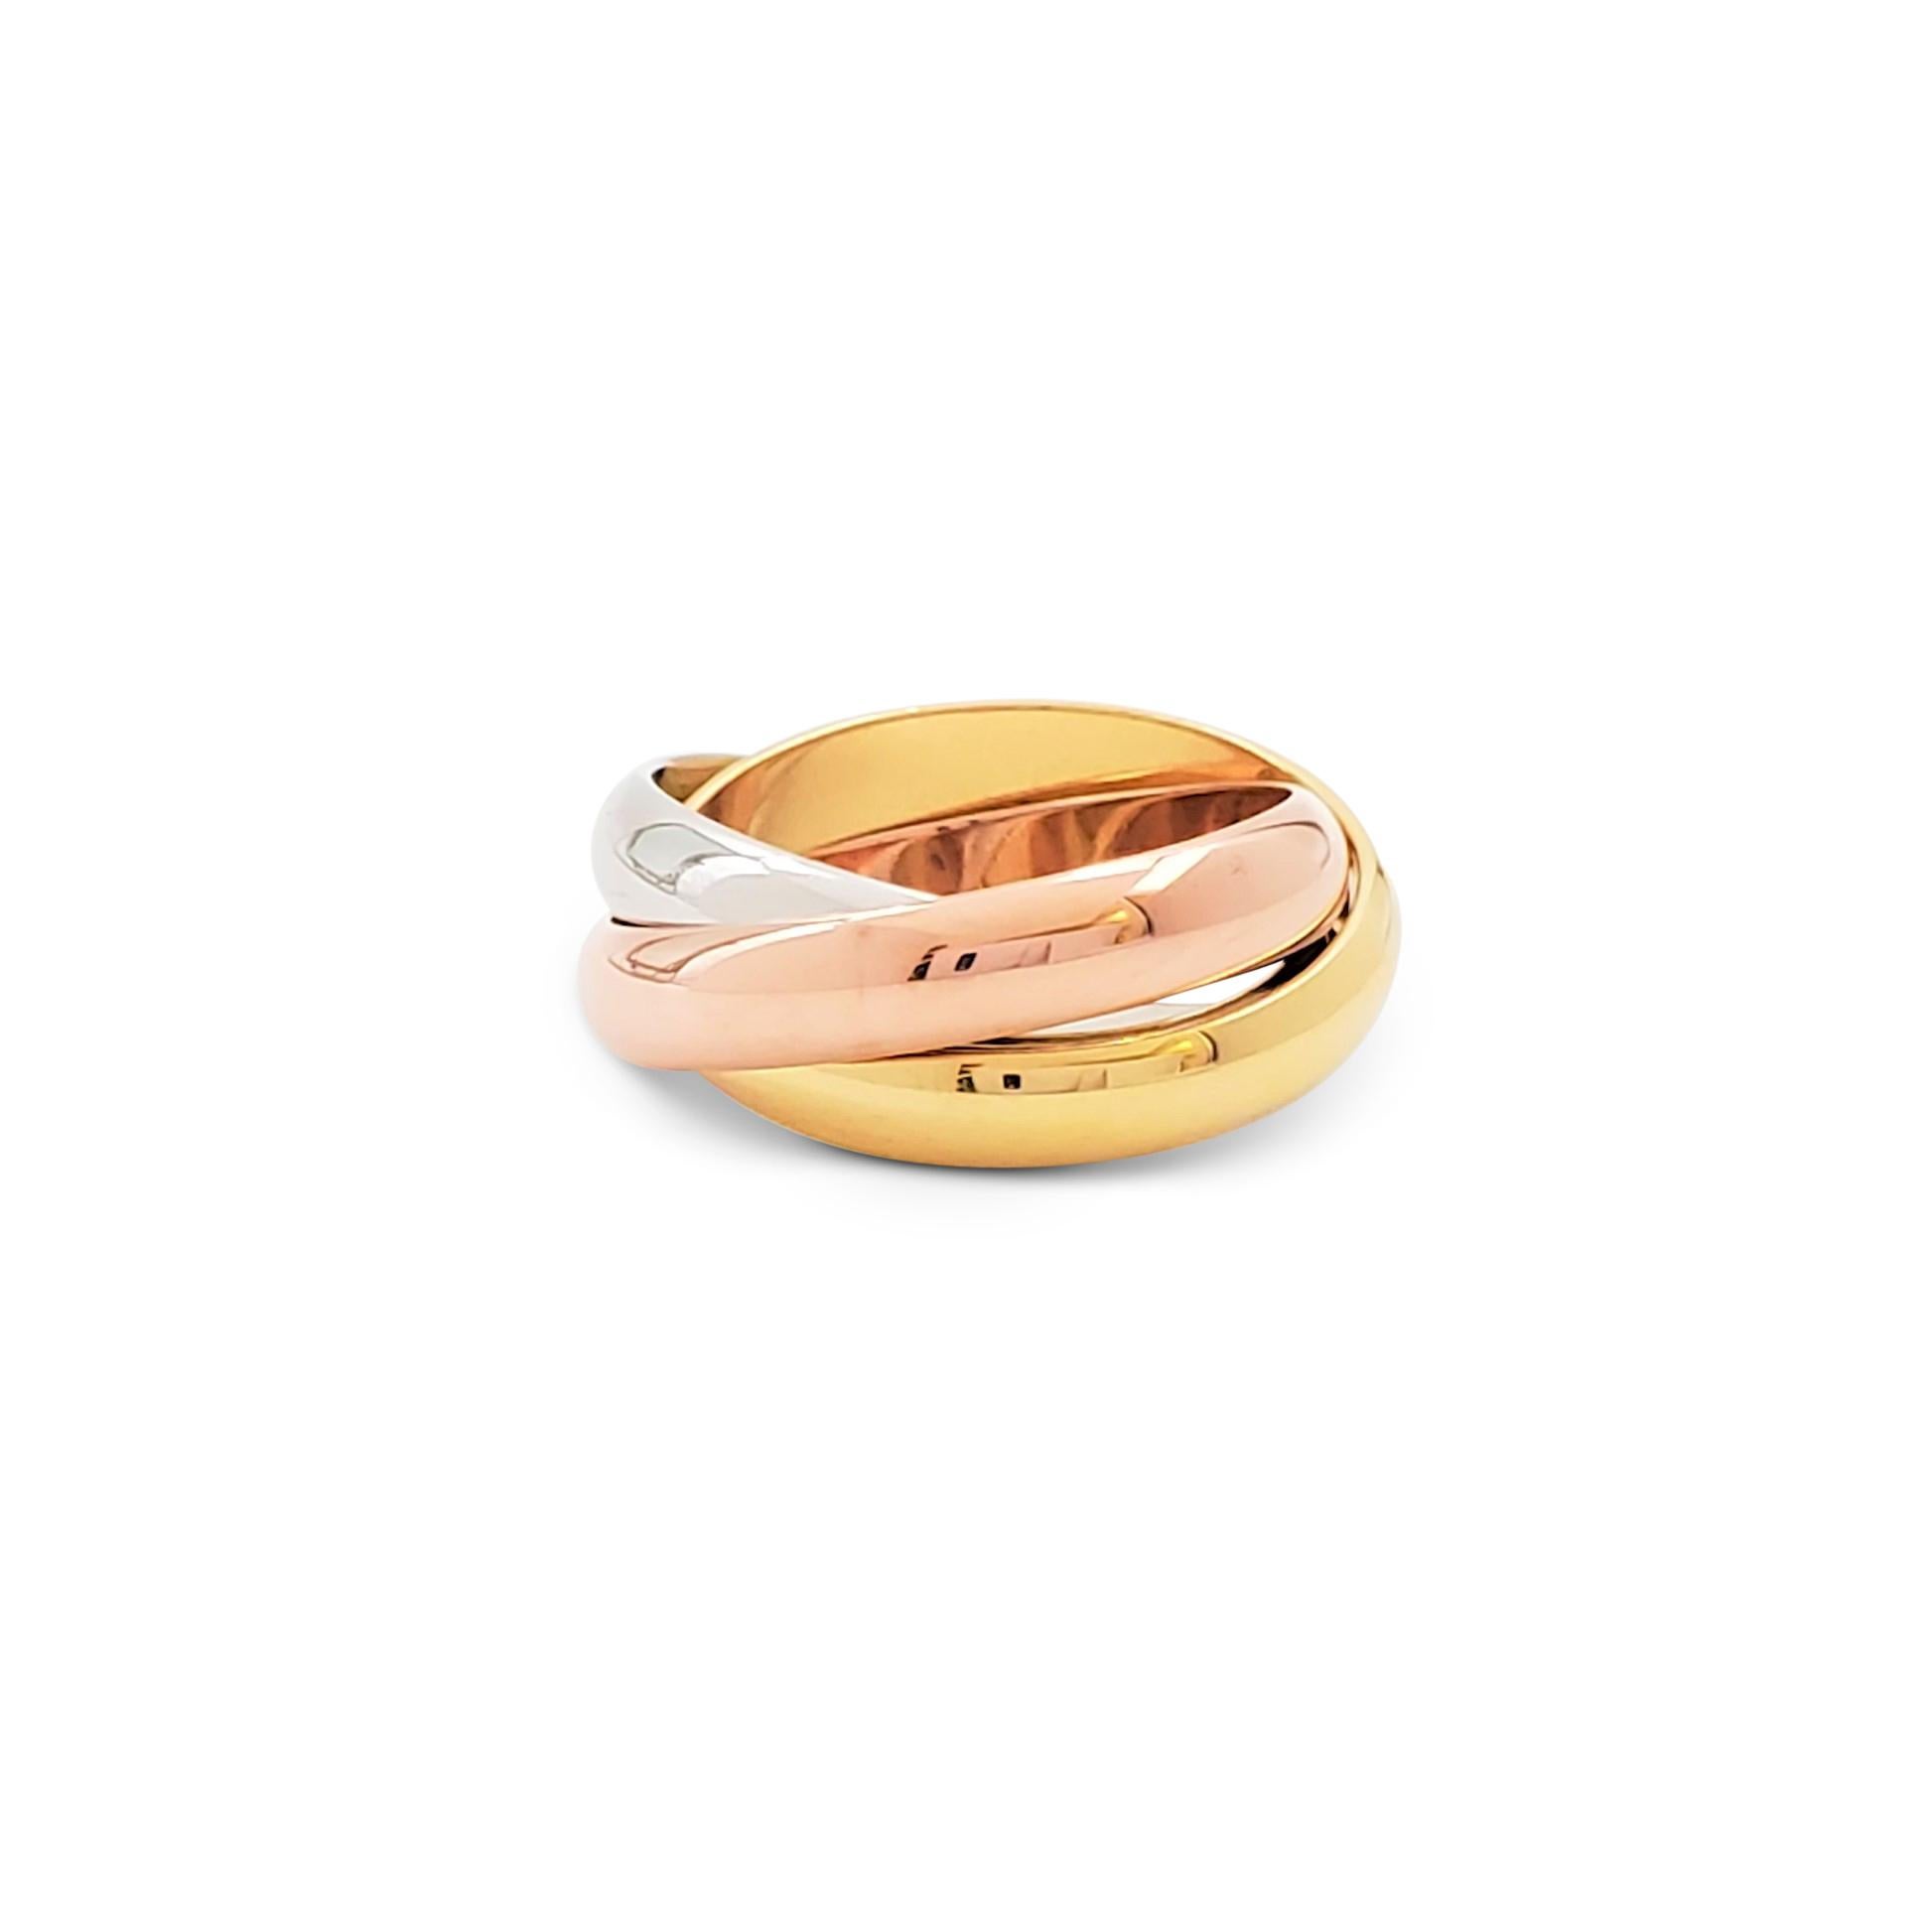 Authentic Cartier 'Trinity' ring comprised of interlocking bands of 18 karat yellow, rose, and white gold. Signed Cartier, Au 750, 52, with serial number. Ring size 52 (US 6). Each band measures 4.5 mm wide. Not presented with the original box or